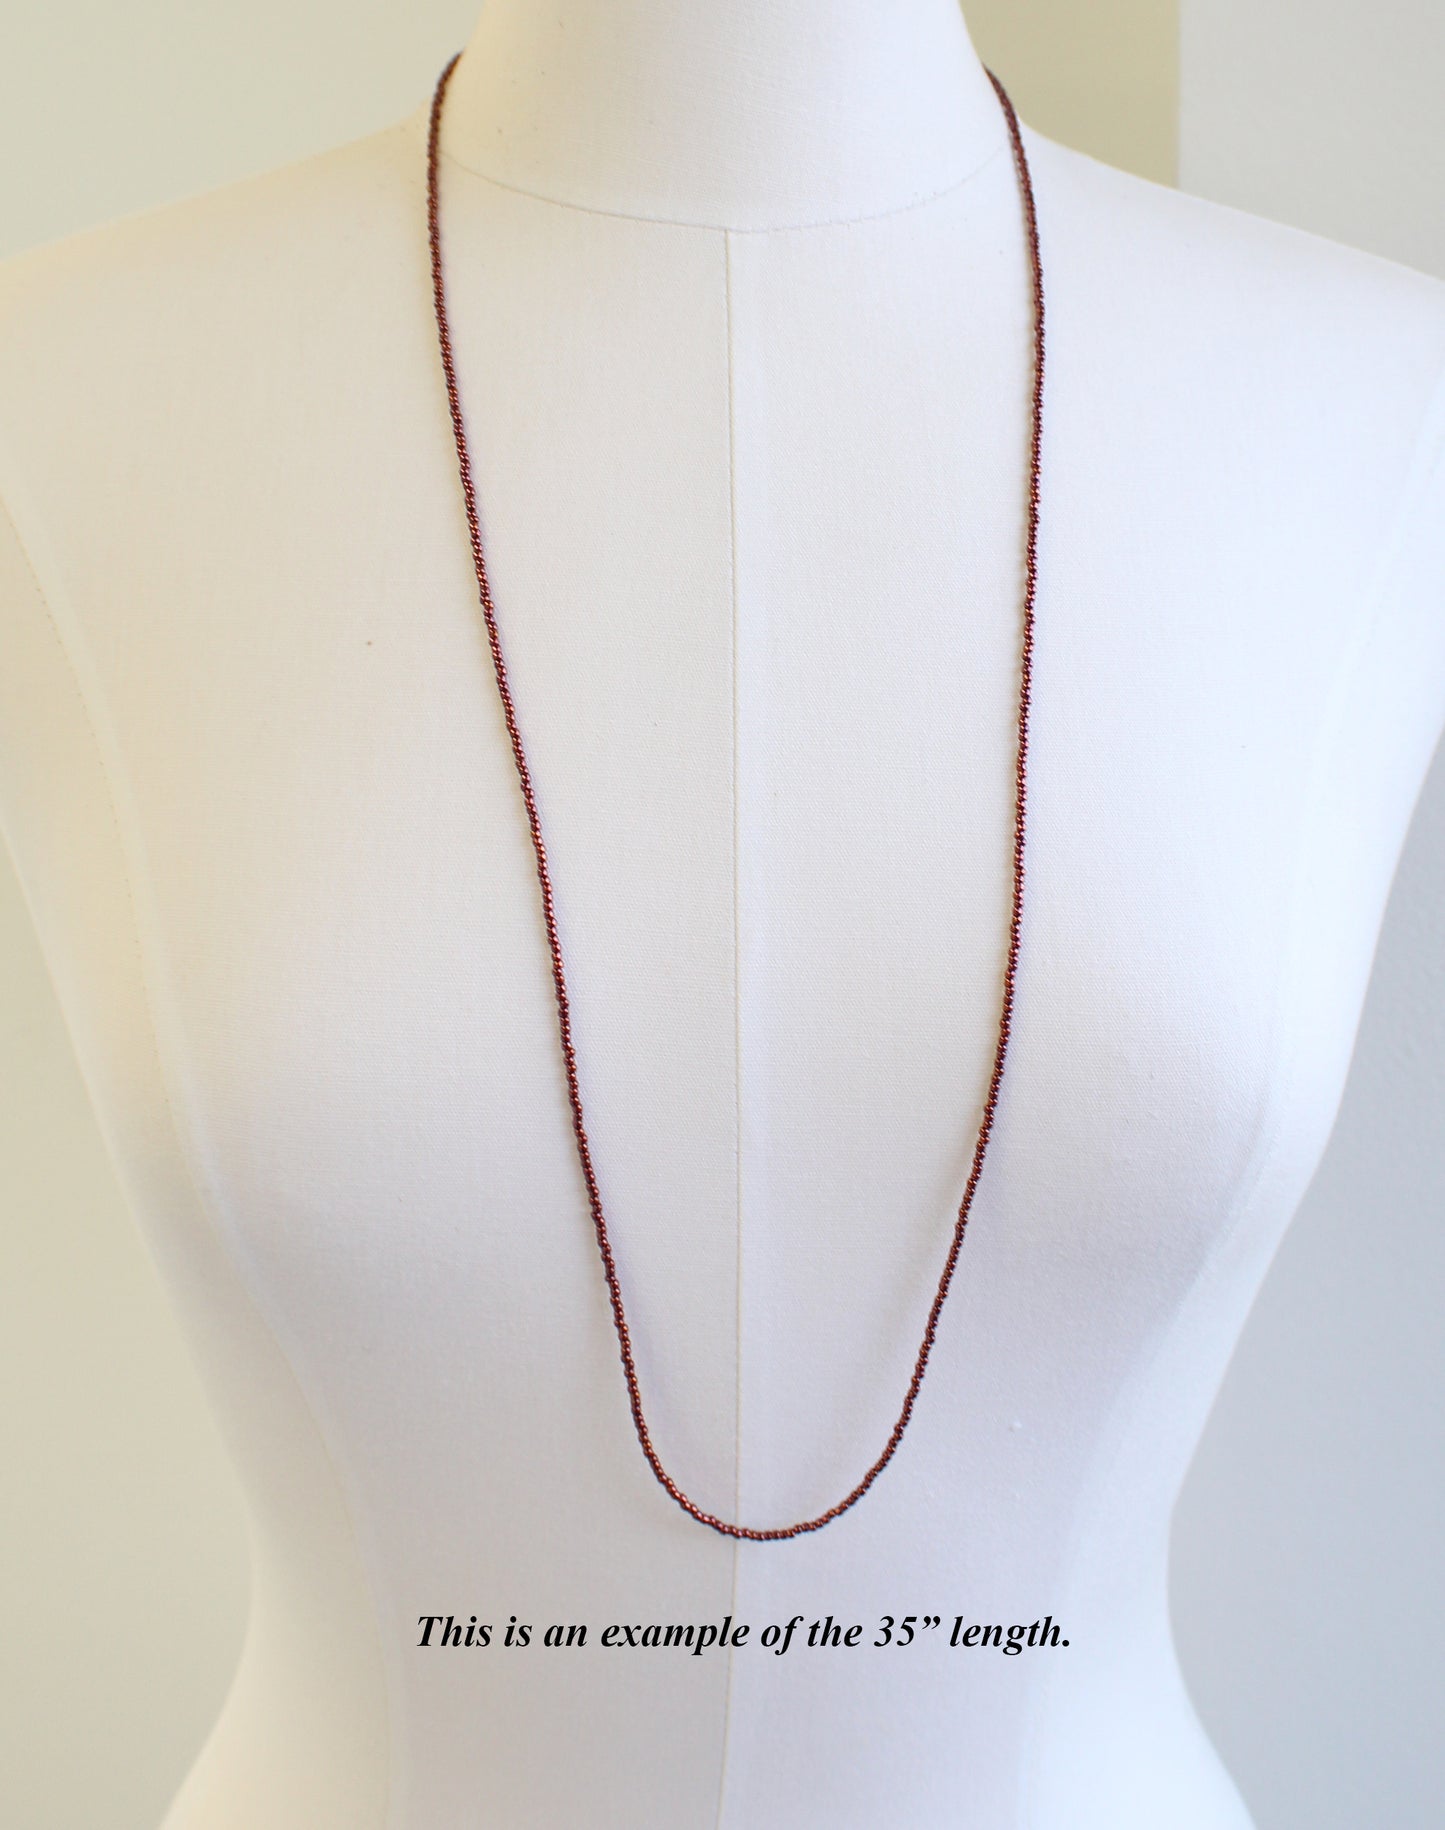 Load image into Gallery viewer, Dark Bronze Seed Bead Necklace-Shiny Metallic Copper Colored -Single Strand
